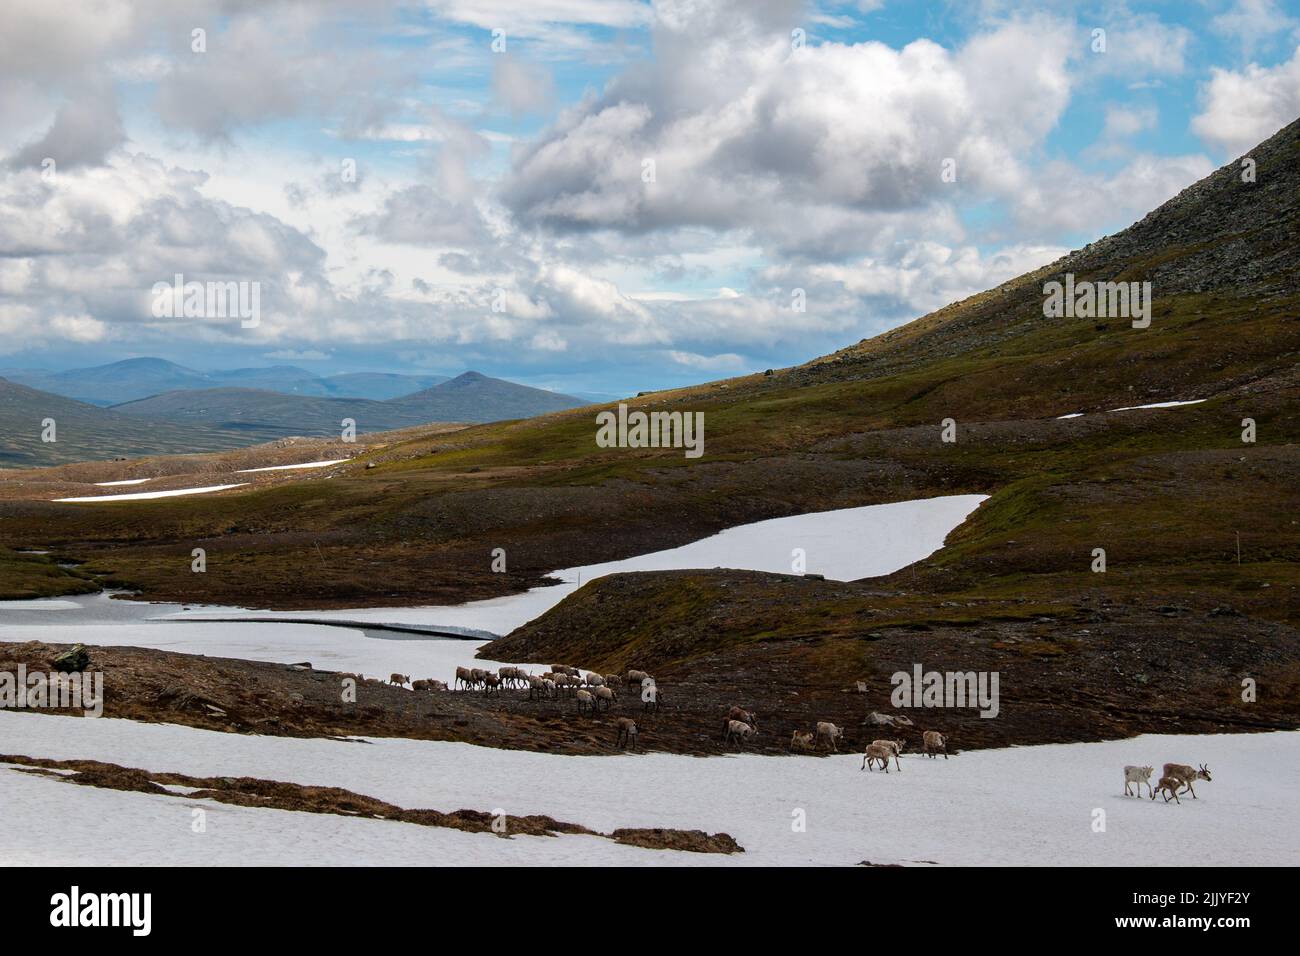 A herd of reindeers crossing snow patches in the mountains between Norwegian Nedalshytta and Swedish Sylarna in early July, Jamtland, Sweden Stock Photo